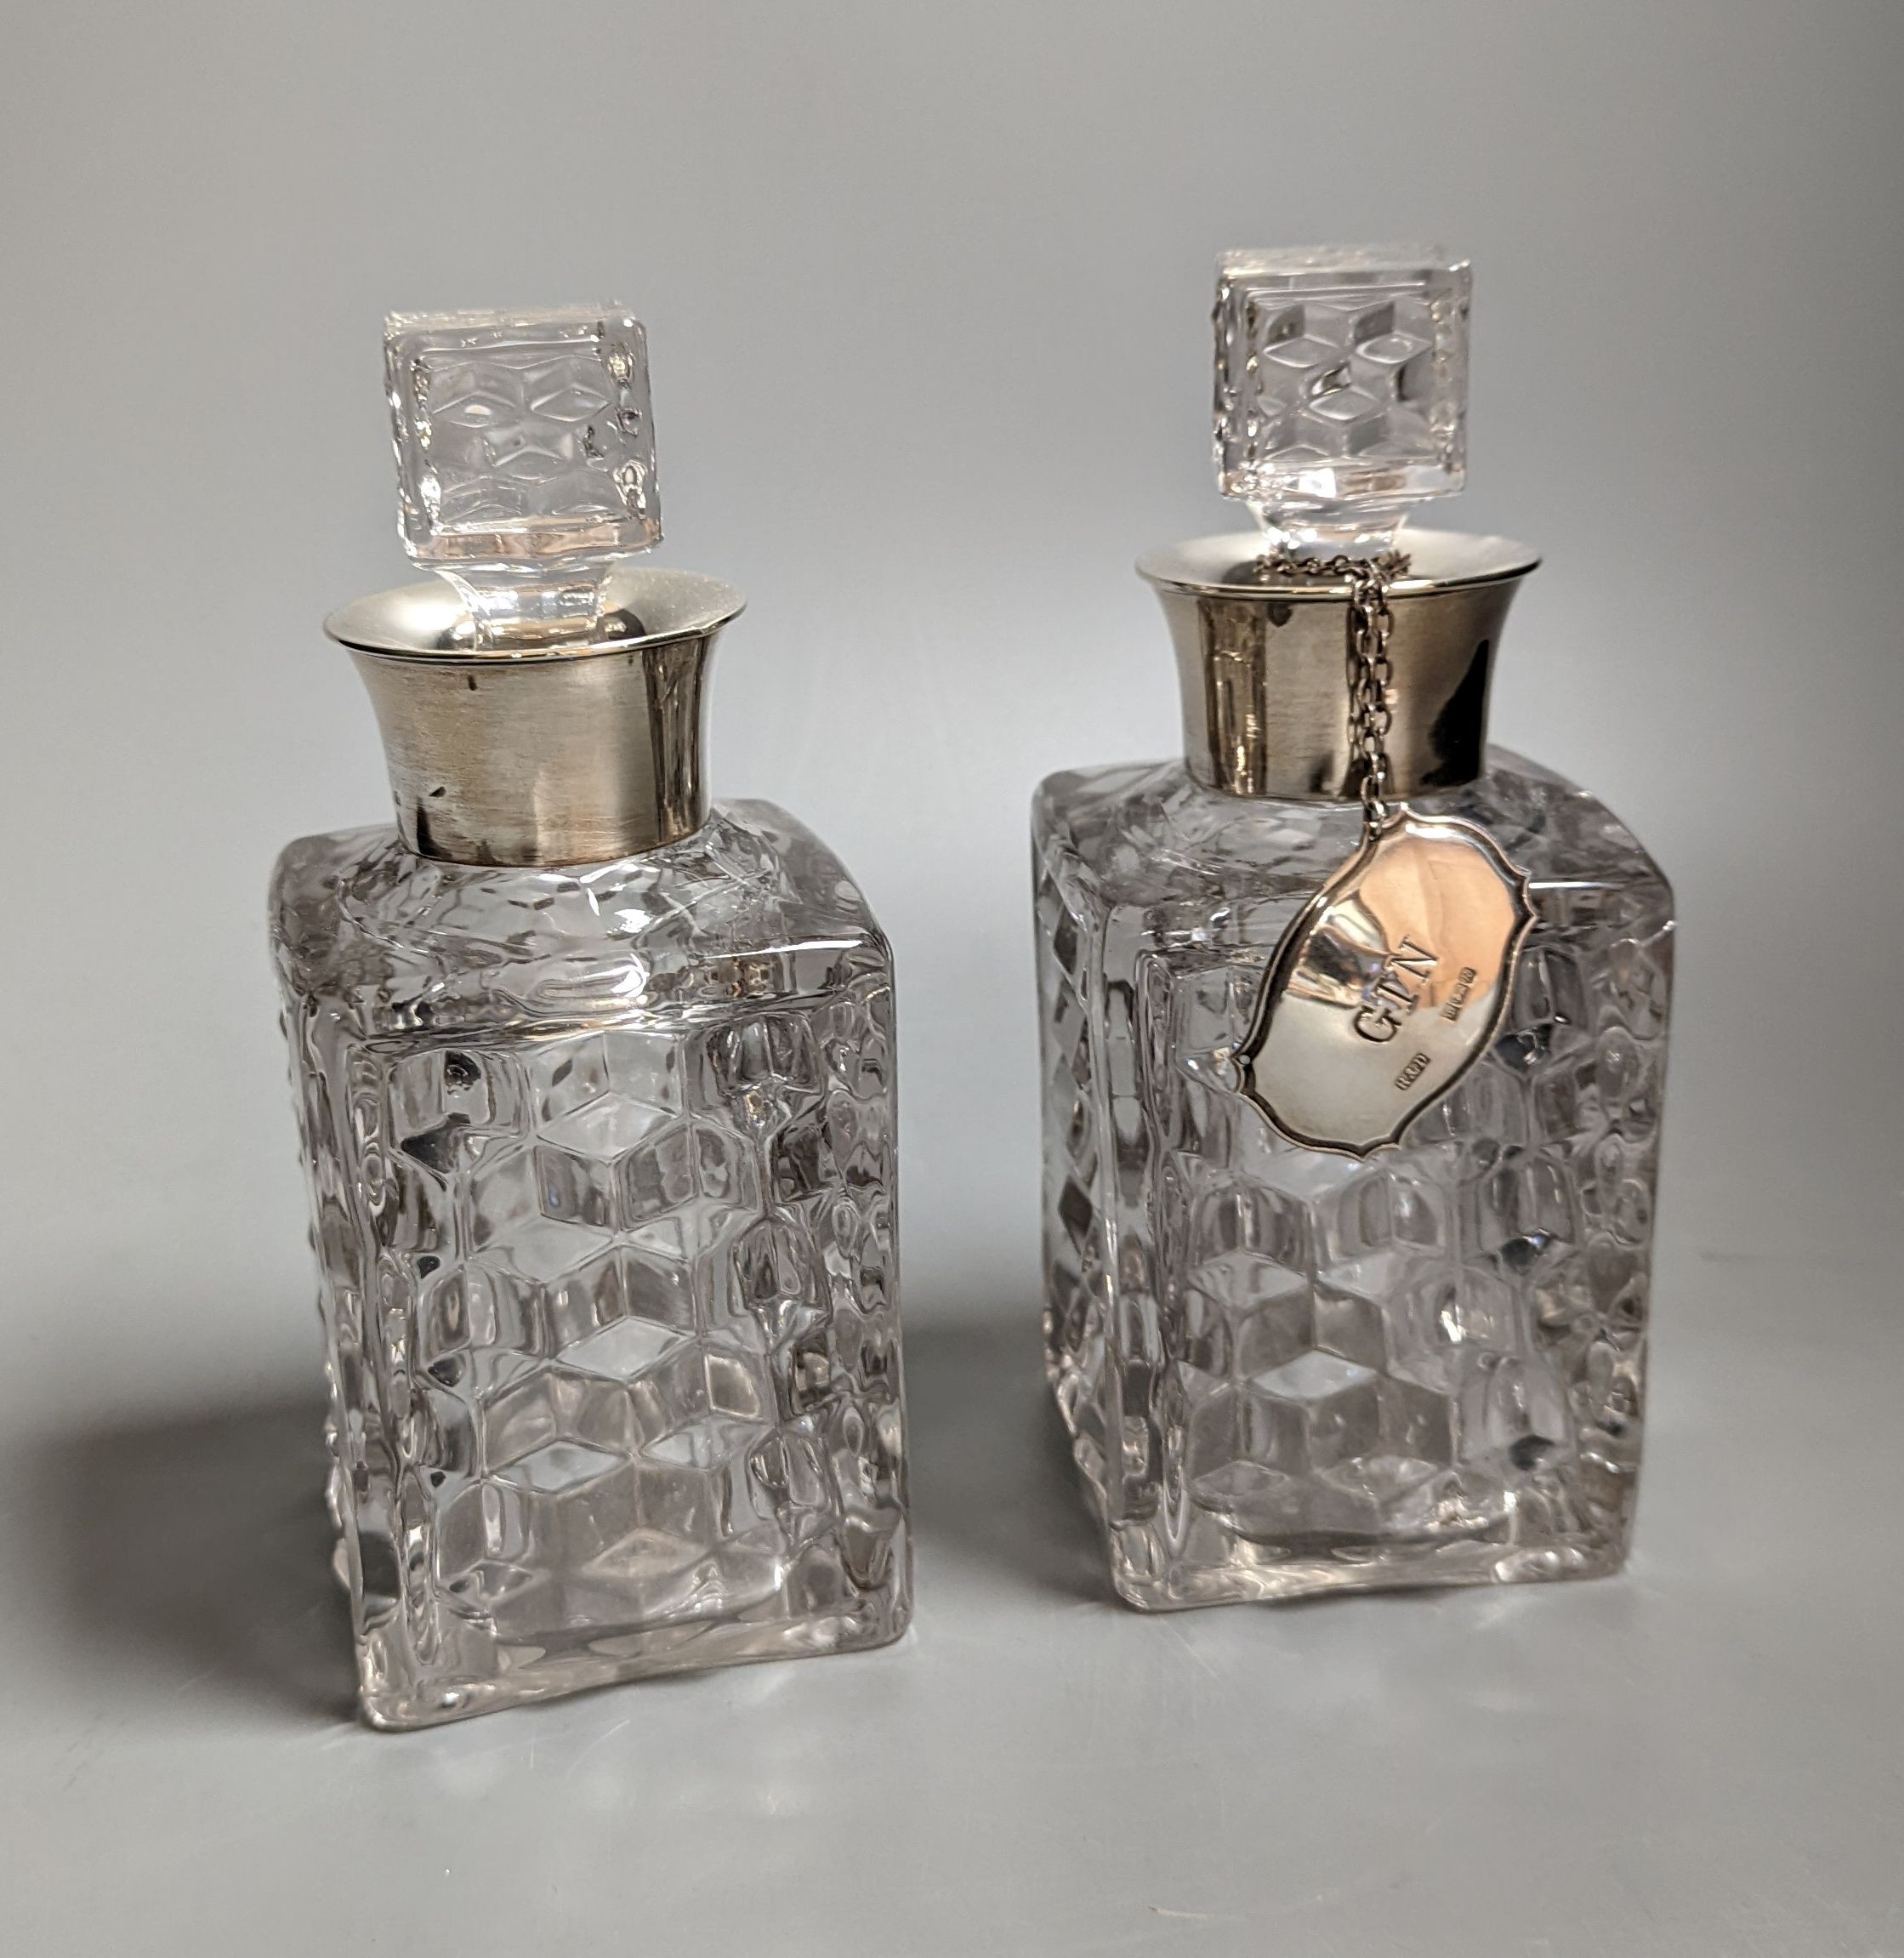 A pair of silver mounted cut glass spirit decanters and a ‘GIN’ spirit label